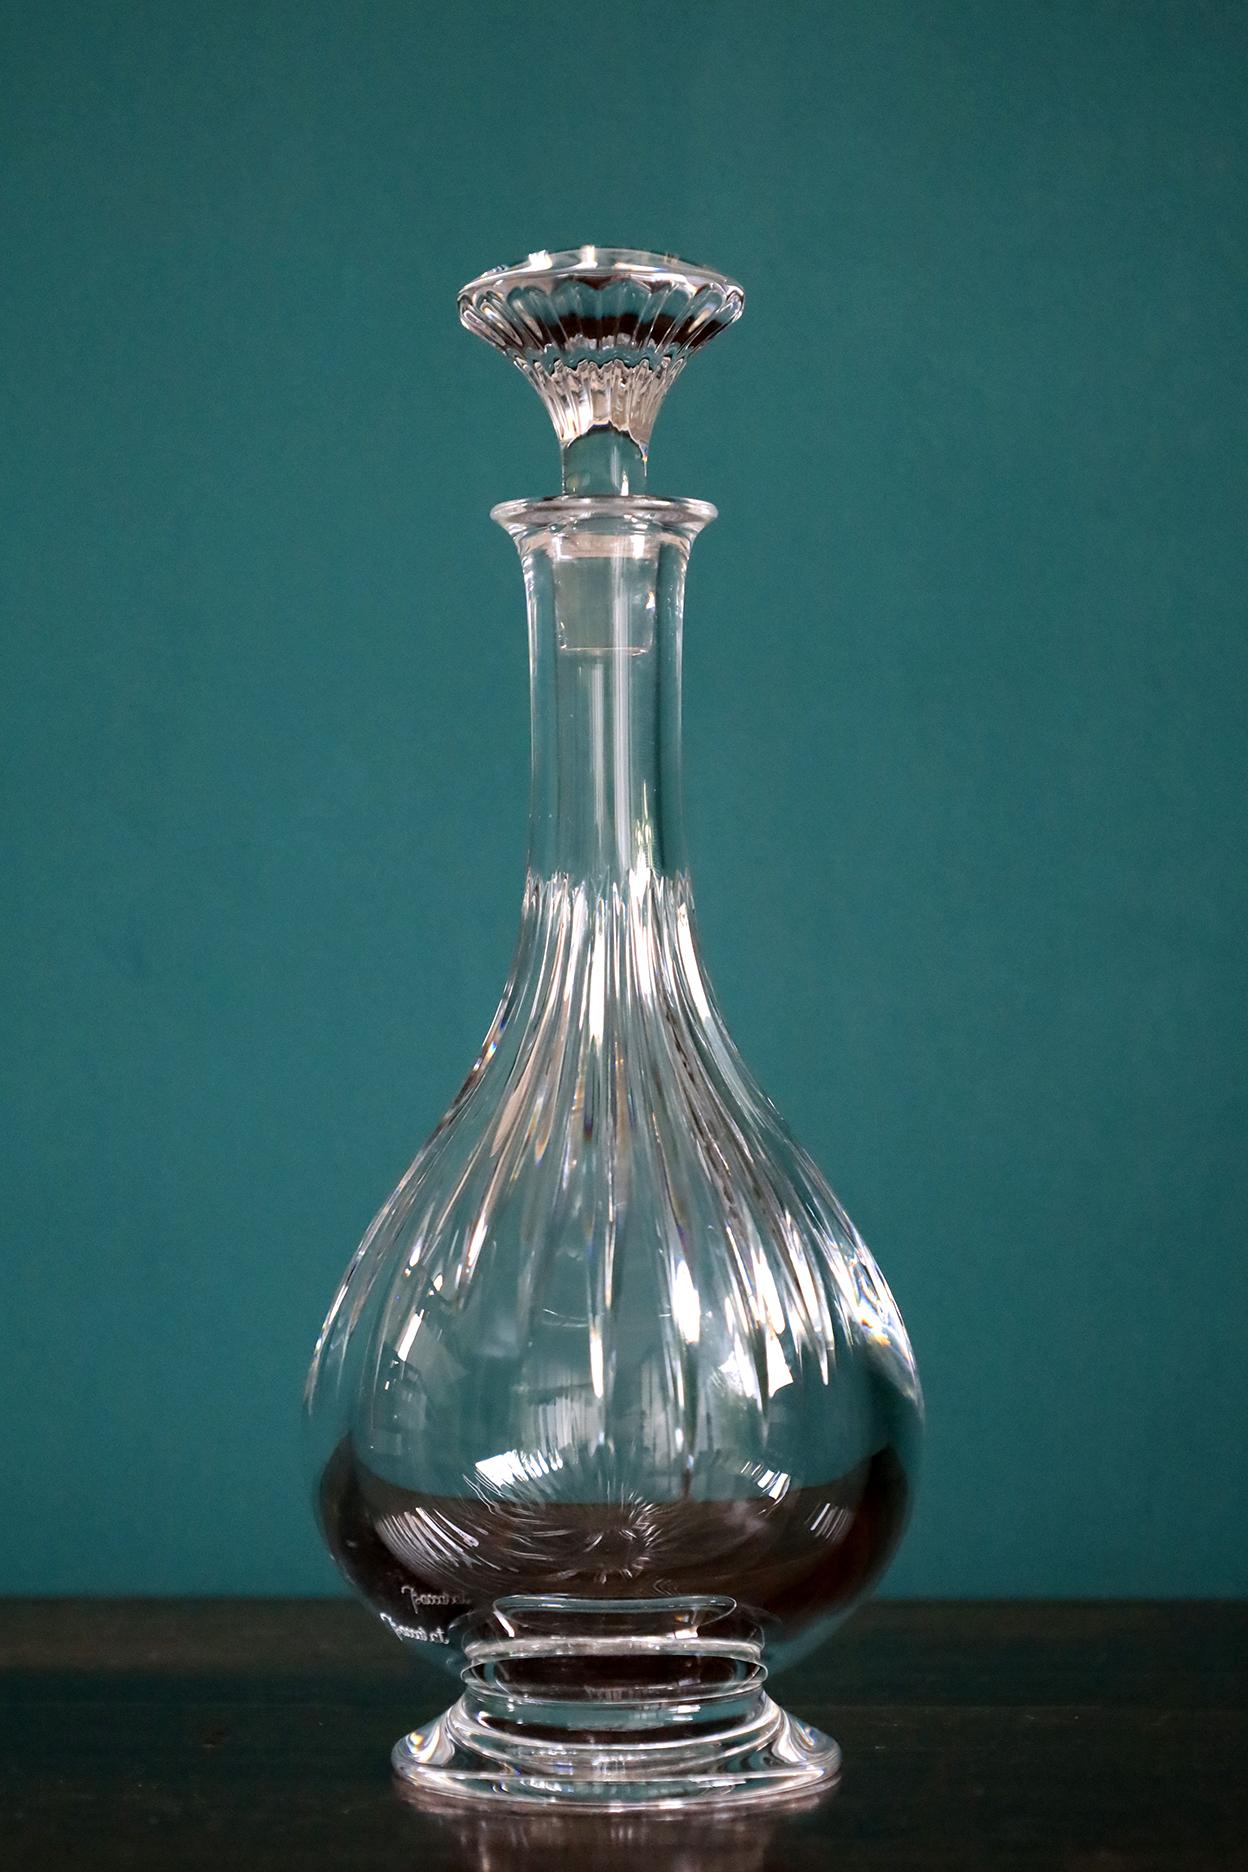 The Baccarat Clear crystal Massena round whiskey decanter is an éclat of sparkle and refinement. Its polished silhouette is worthy of display and use for any festive soirée or quiet smooth drink